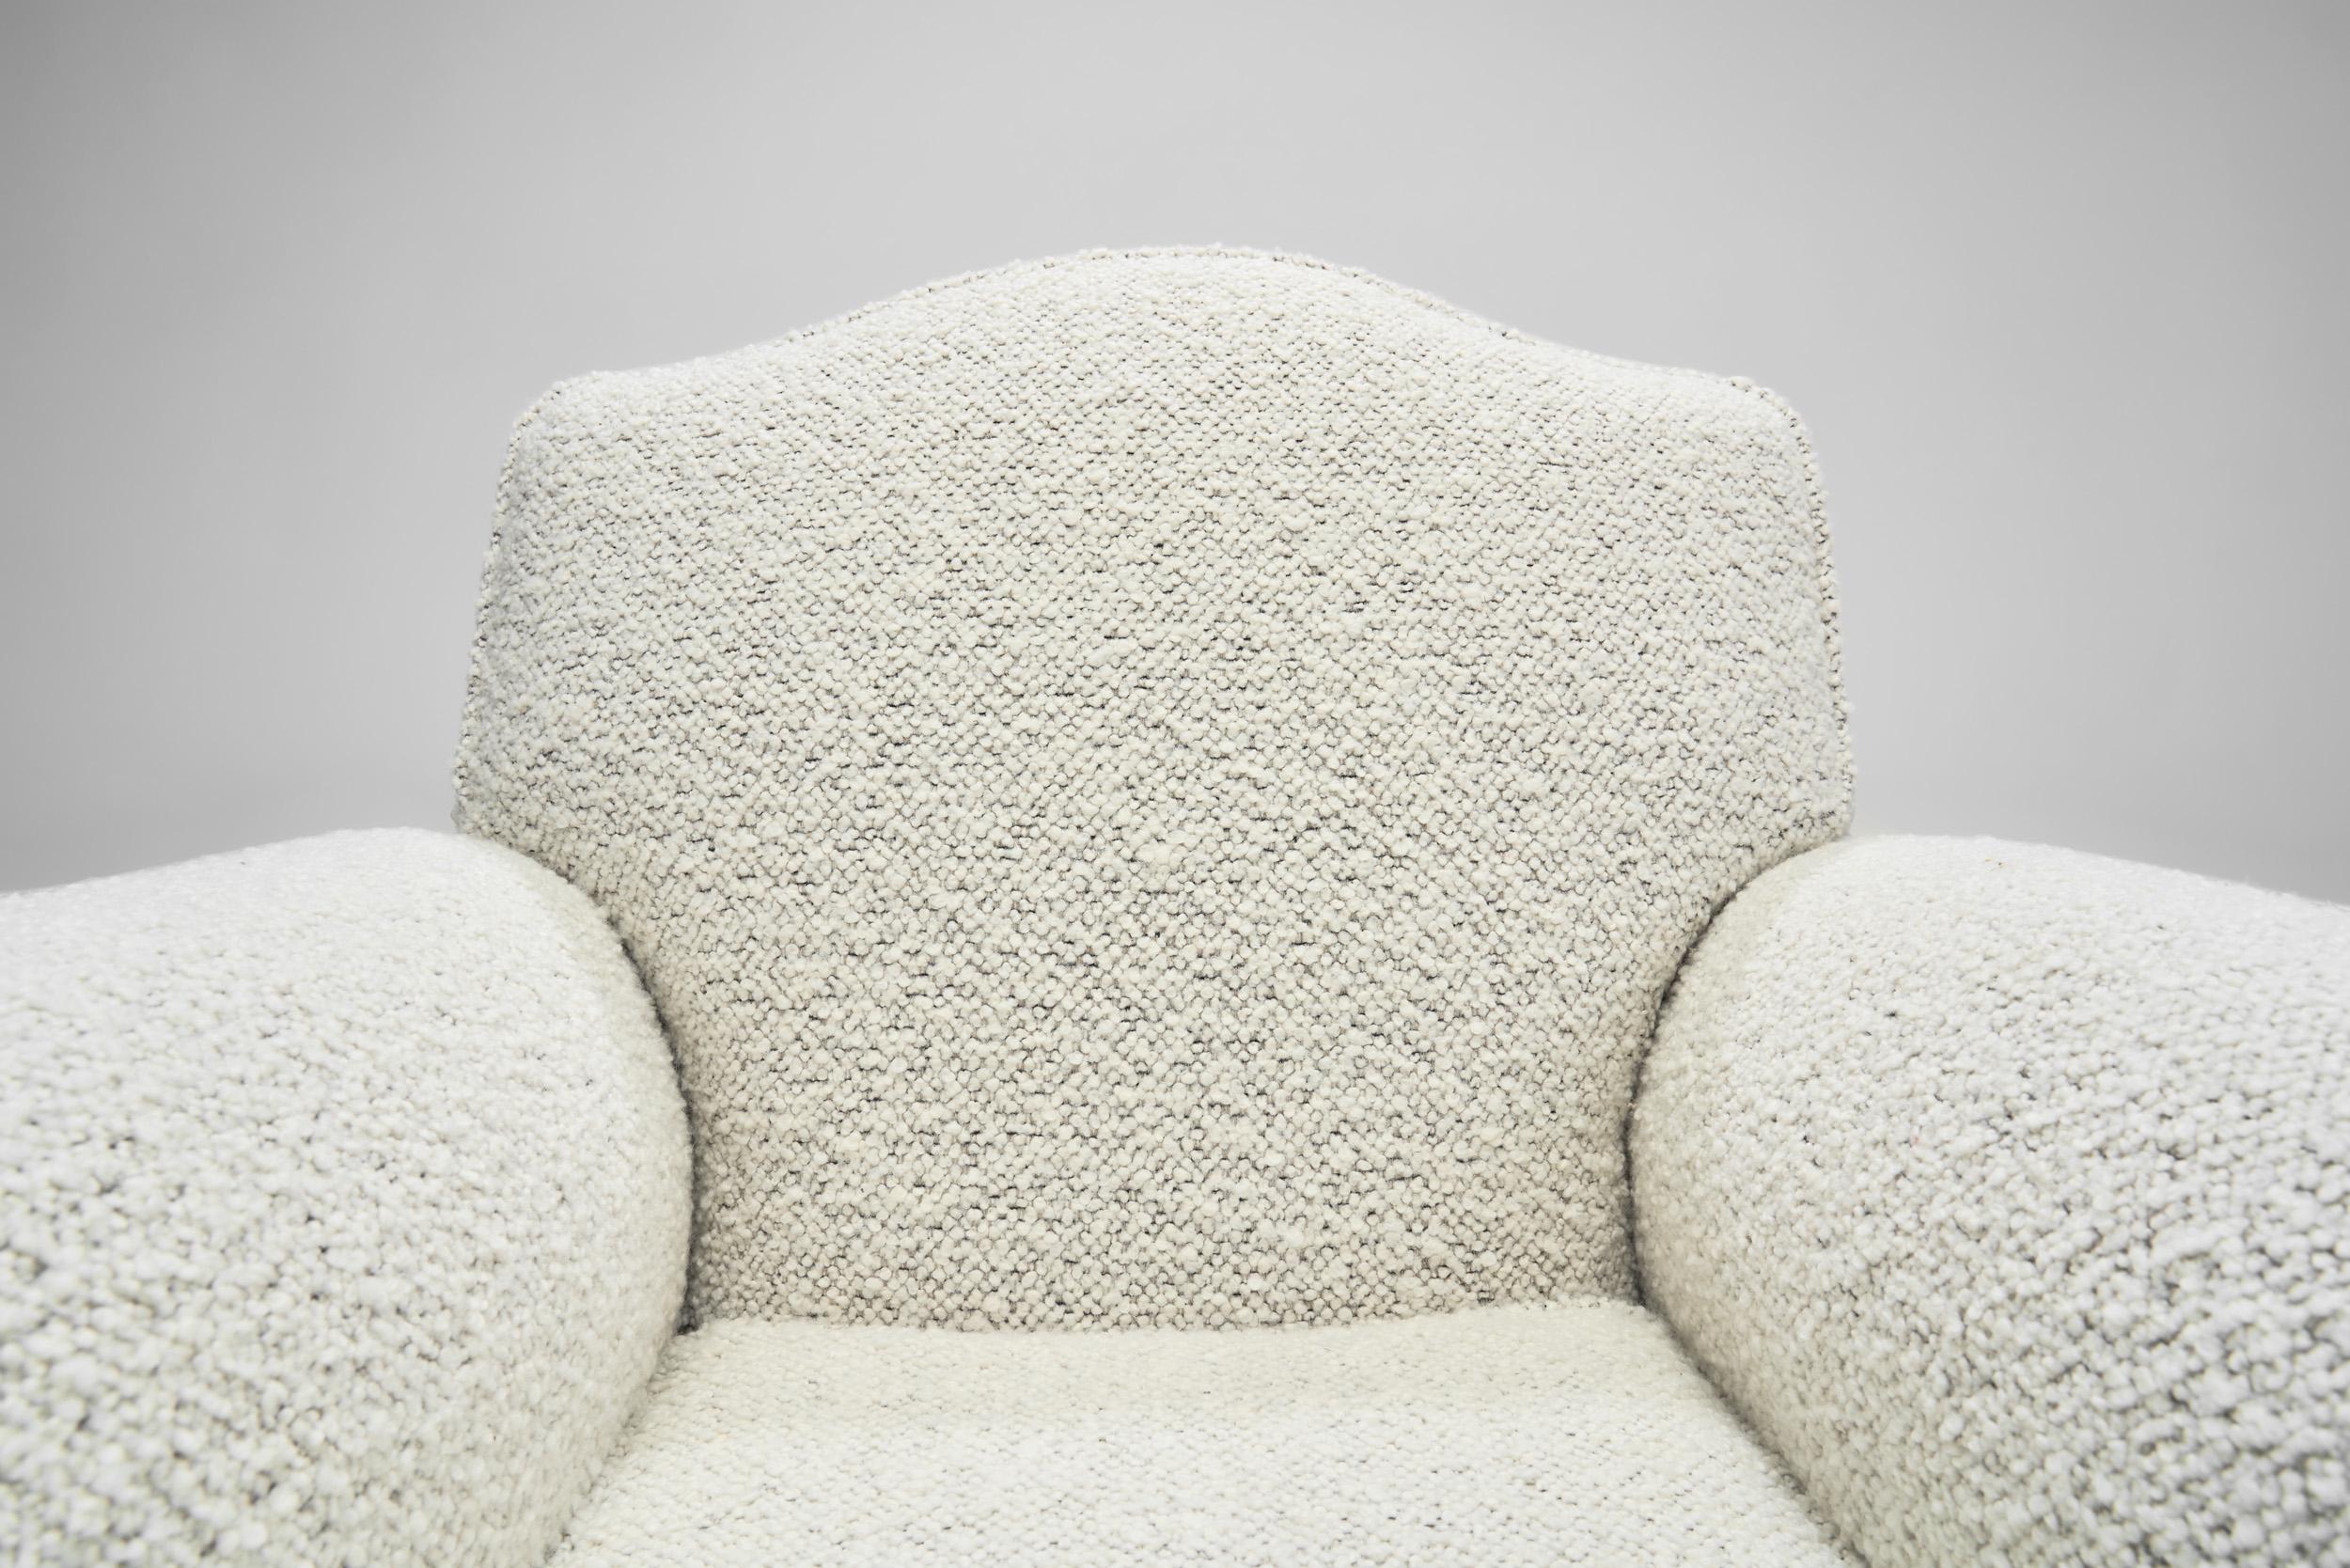 Art Deco Armchair Upholstered in Bouclé, Europe ca 1930s For Sale 6